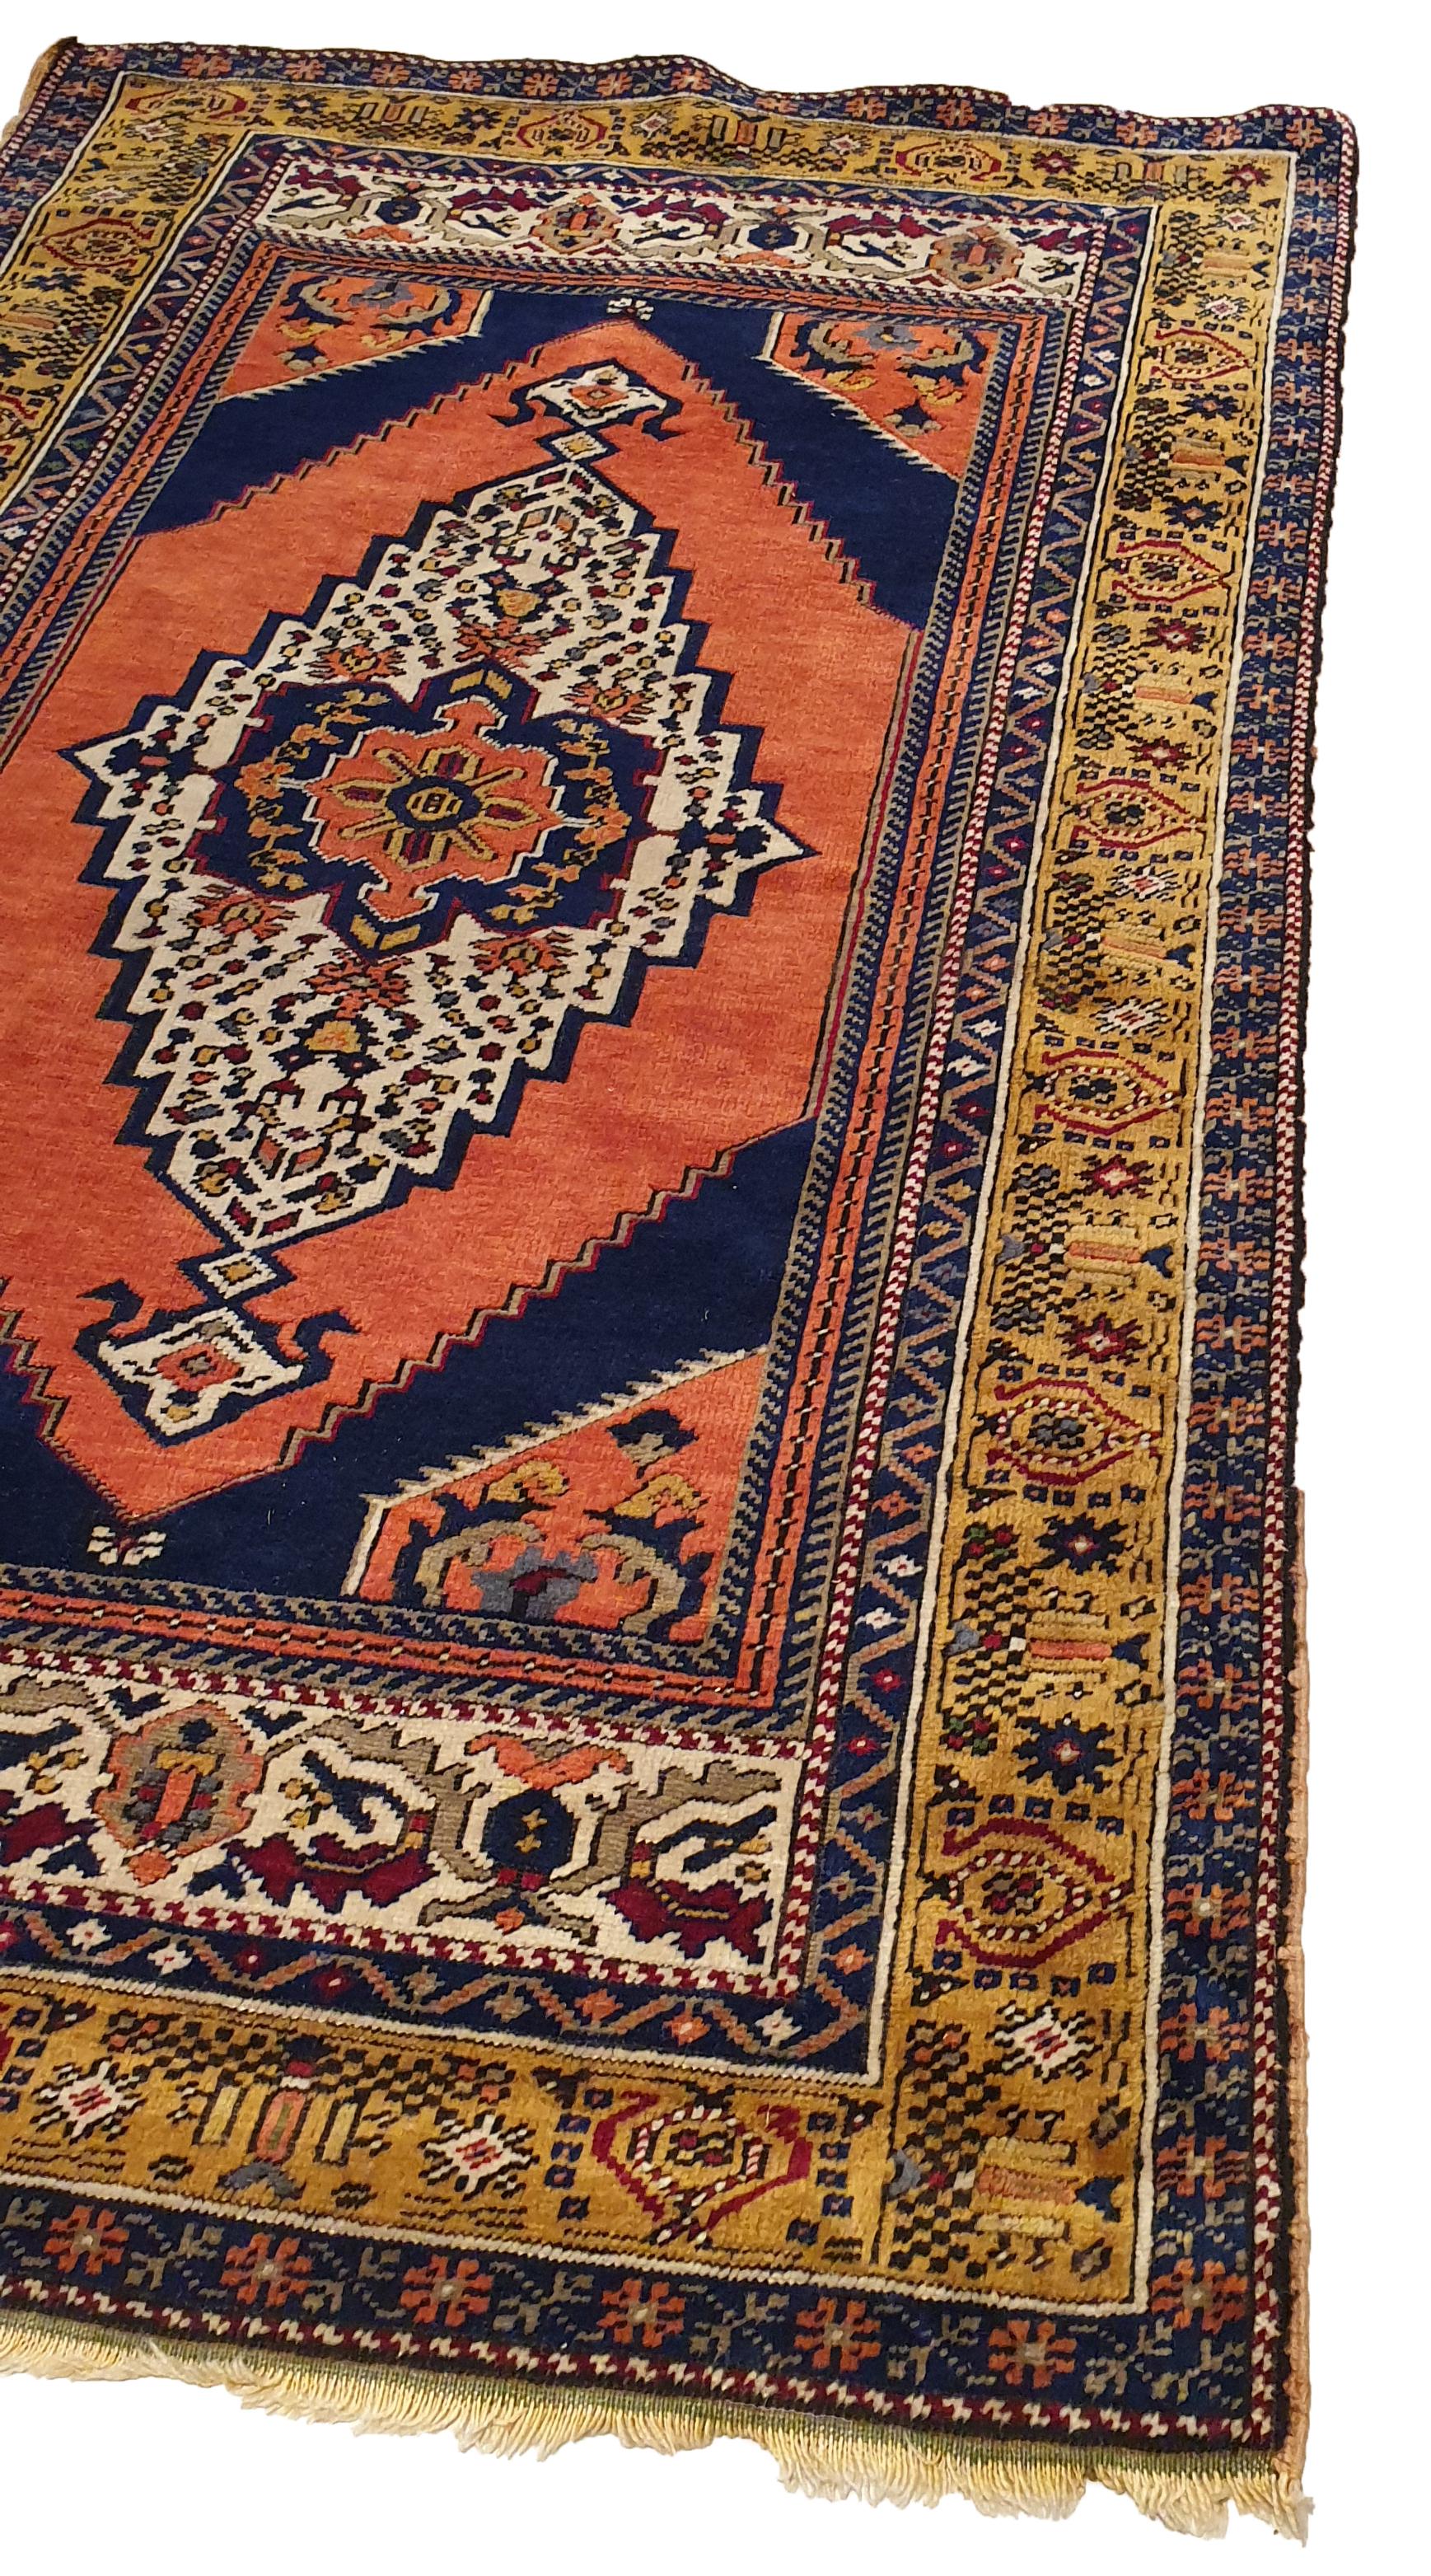 831 - very beautiful mid-20th century Turkish carpet with a nice geometric design and beautiful colors with red, blue and green, completely hand-knotted with wool velor on a wool foundation.